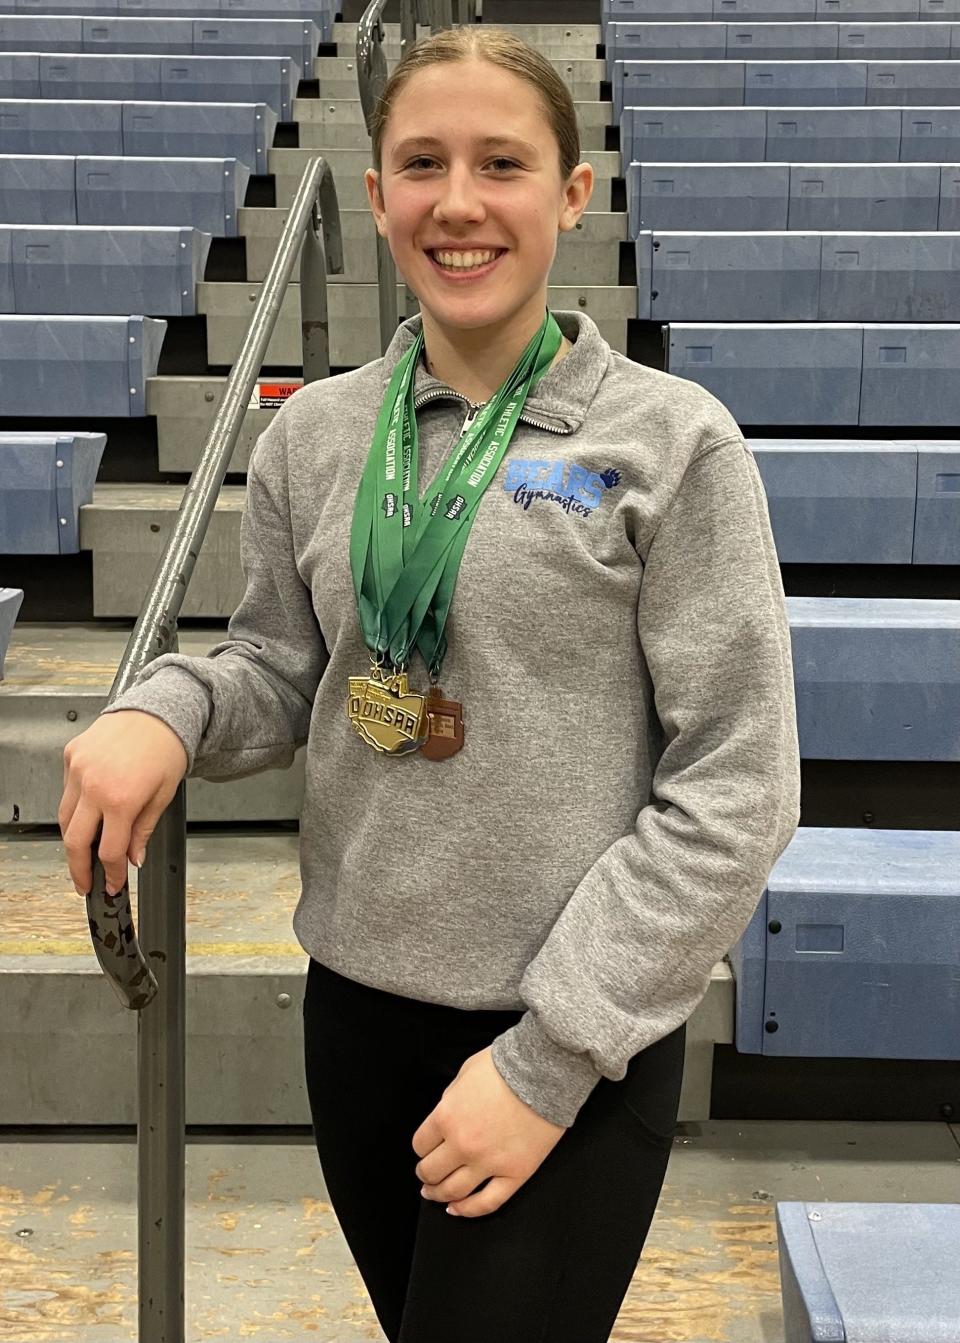 Olentangy Berlin freshman Tayten Swain won the all-around, floor exercise and vault at the district meet Saturday at Worthington Kilbourne.